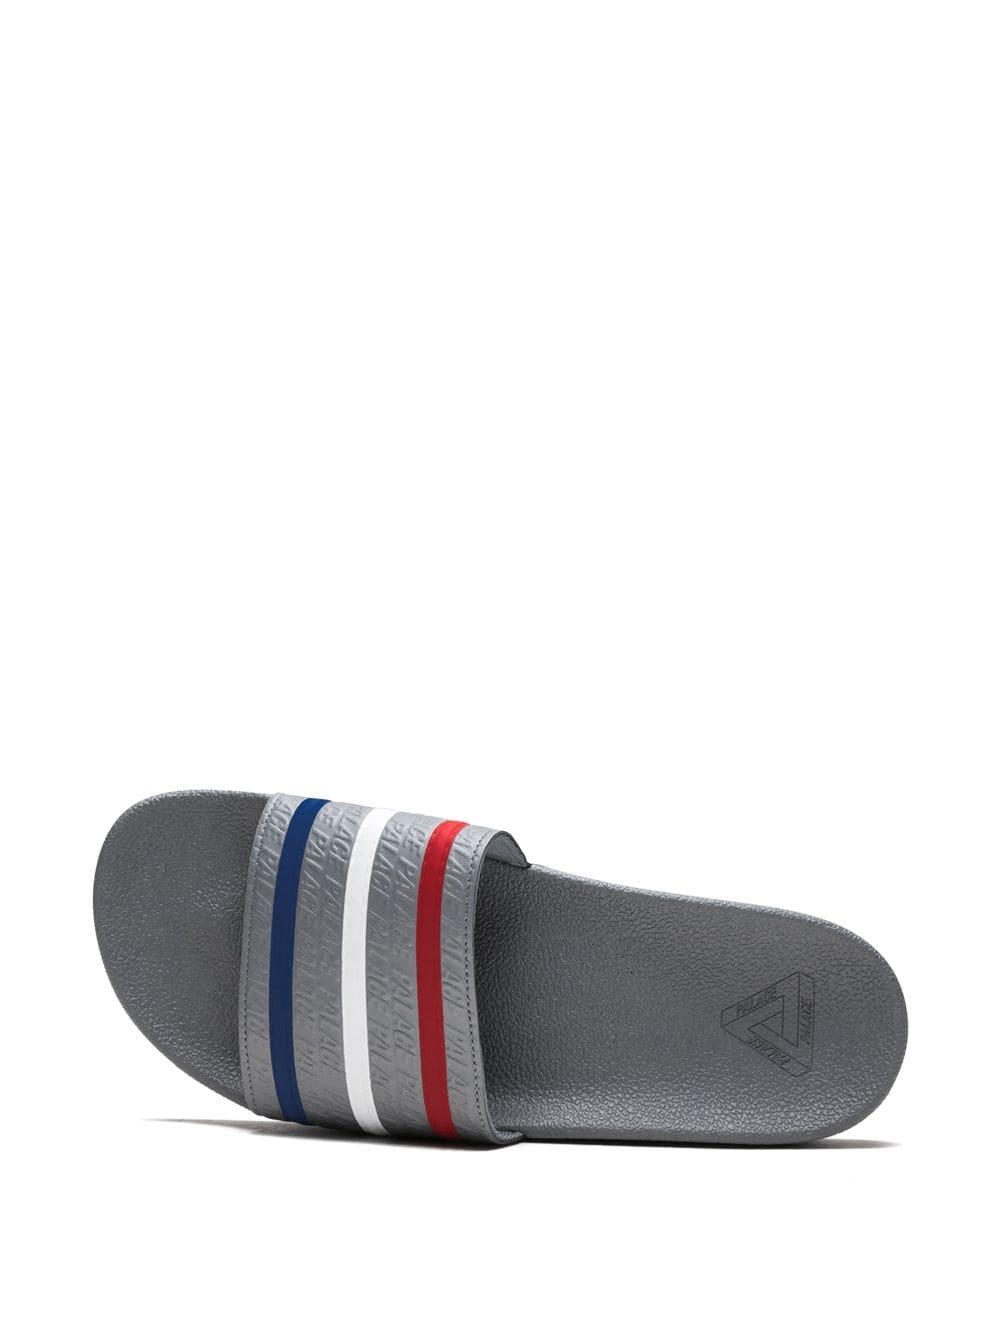 adidas Synthetic X Palace Adilette Sliders in Grey (Gray) for Men - Lyst